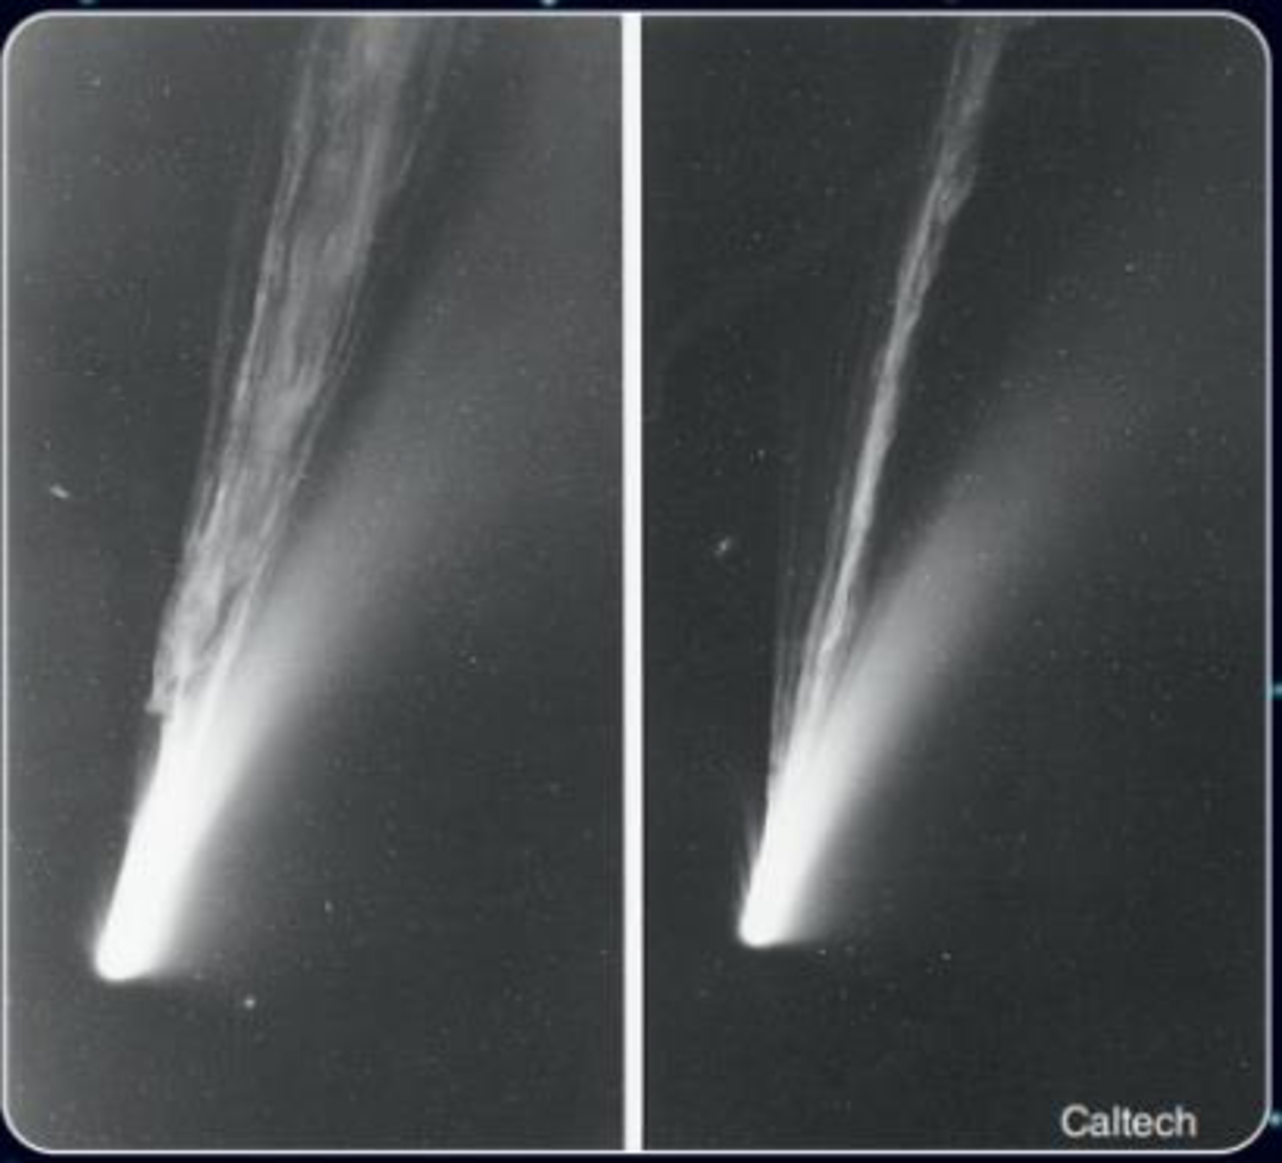 Chapter 25, Problem 4LTL, Look at the images of Comet Mrkos on the left page of Concept Art: Observations of Comets. Is the 